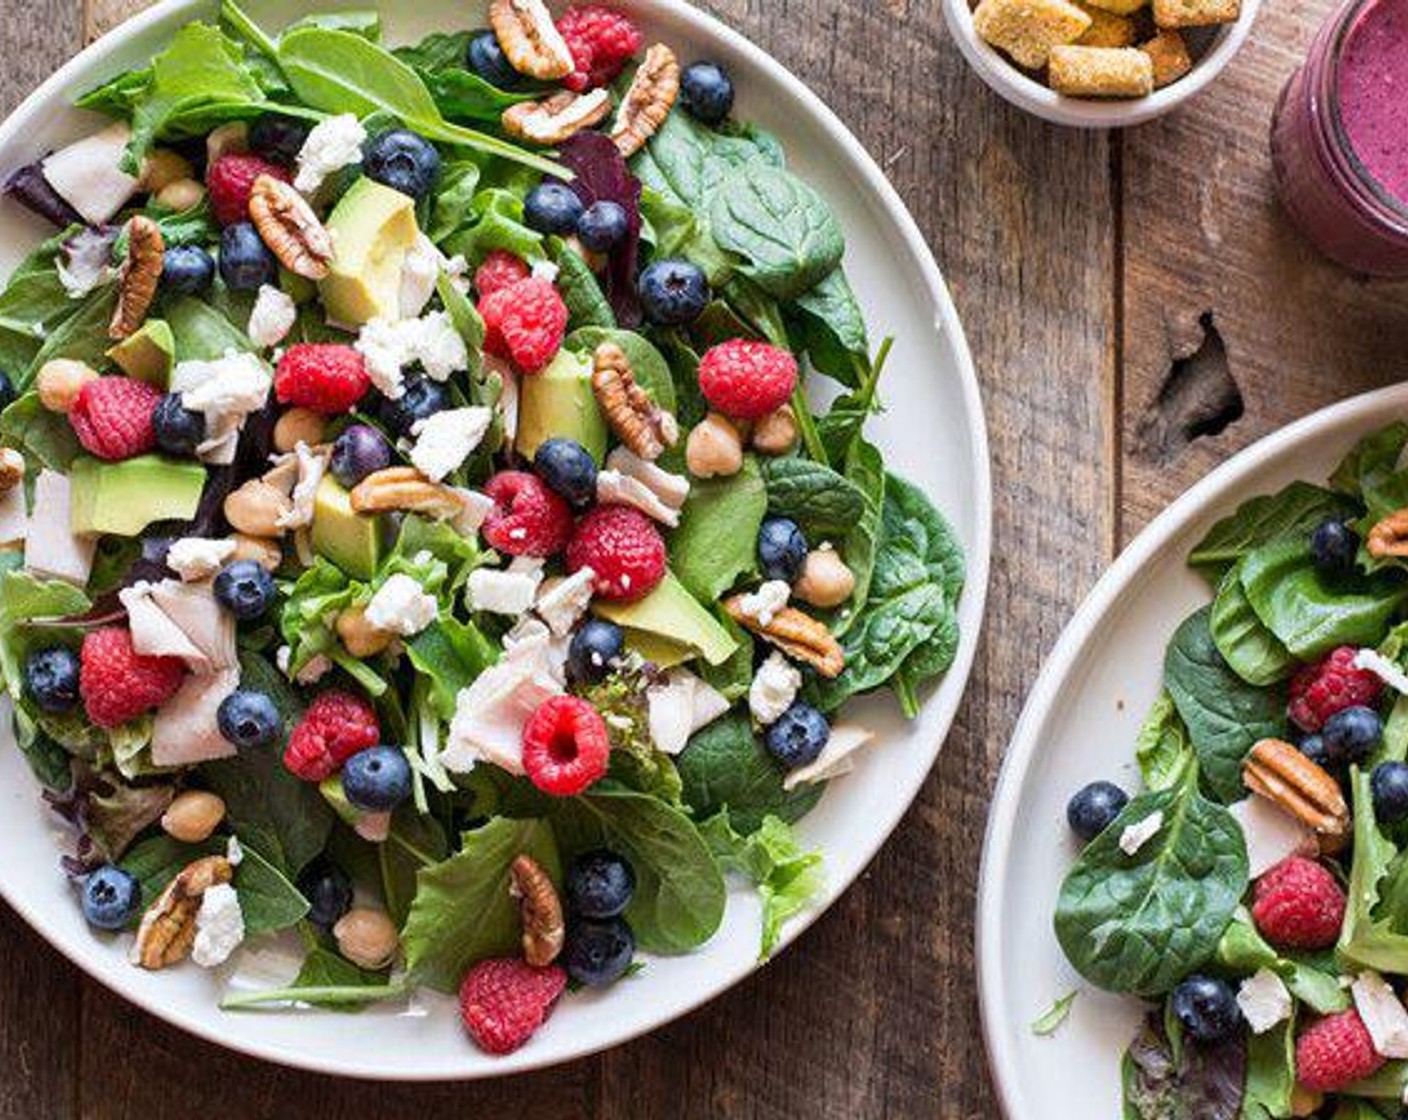 step 1 Layer Romaine Spring Mix (2 cups), Fresh Spinach (2 cups), Fresh Blueberry (1/2 cup), Fresh Raspberry (1/2 cup), Pecan Halves (1/4 cup), Canned Chickpeas (1/2 cup), Avocado (1/2), Deli Turkey (4 slices), and Goat Cheese (4 Tbsp) in large bowls or plates, dividing the items evenly.